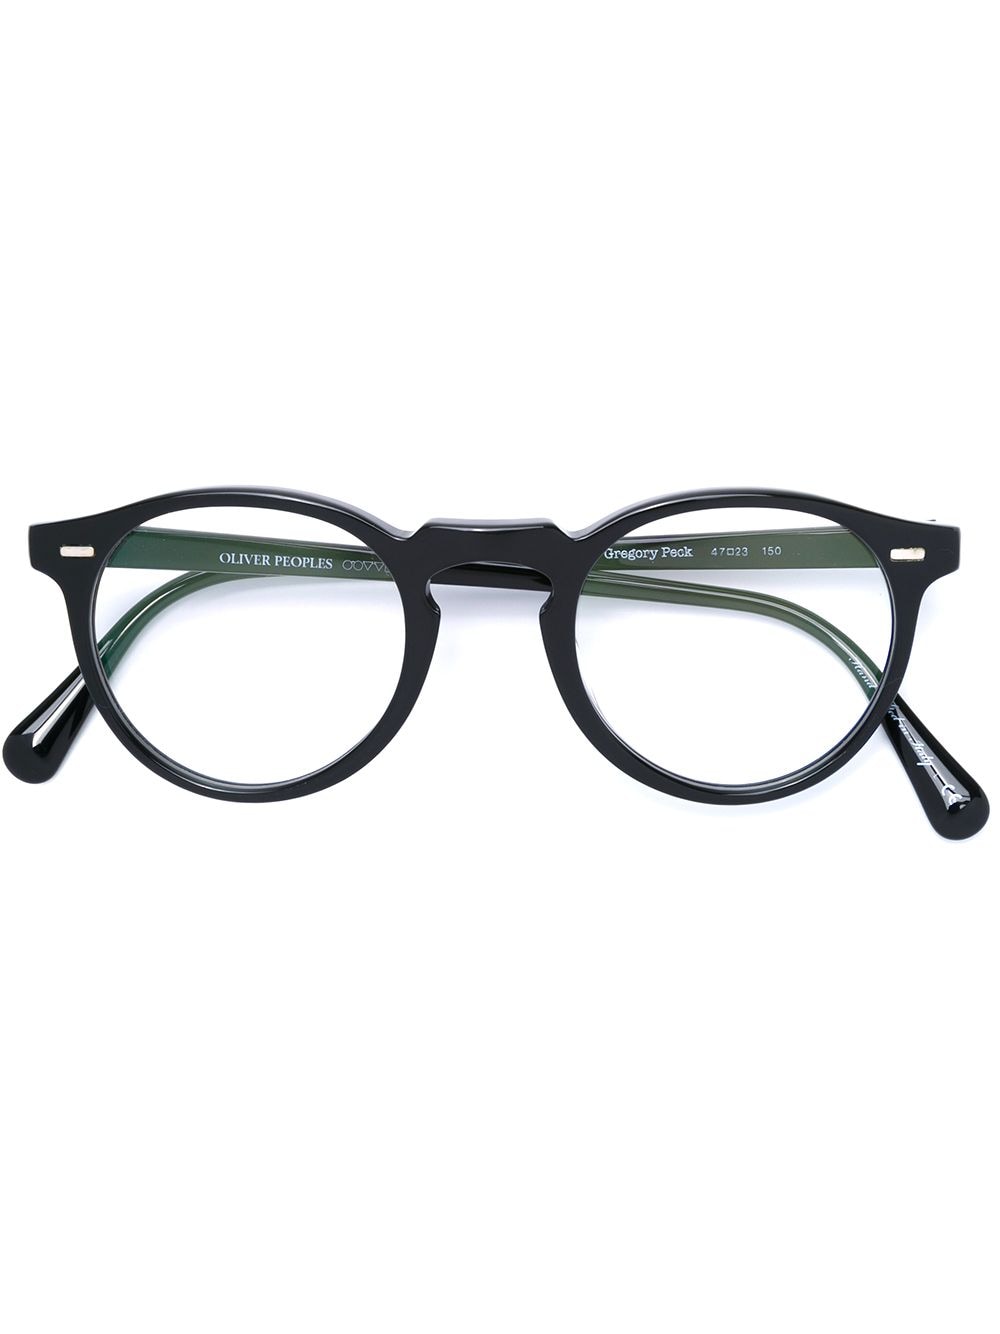 Image 1 of Oliver Peoples 'Gregory Peck' glasses